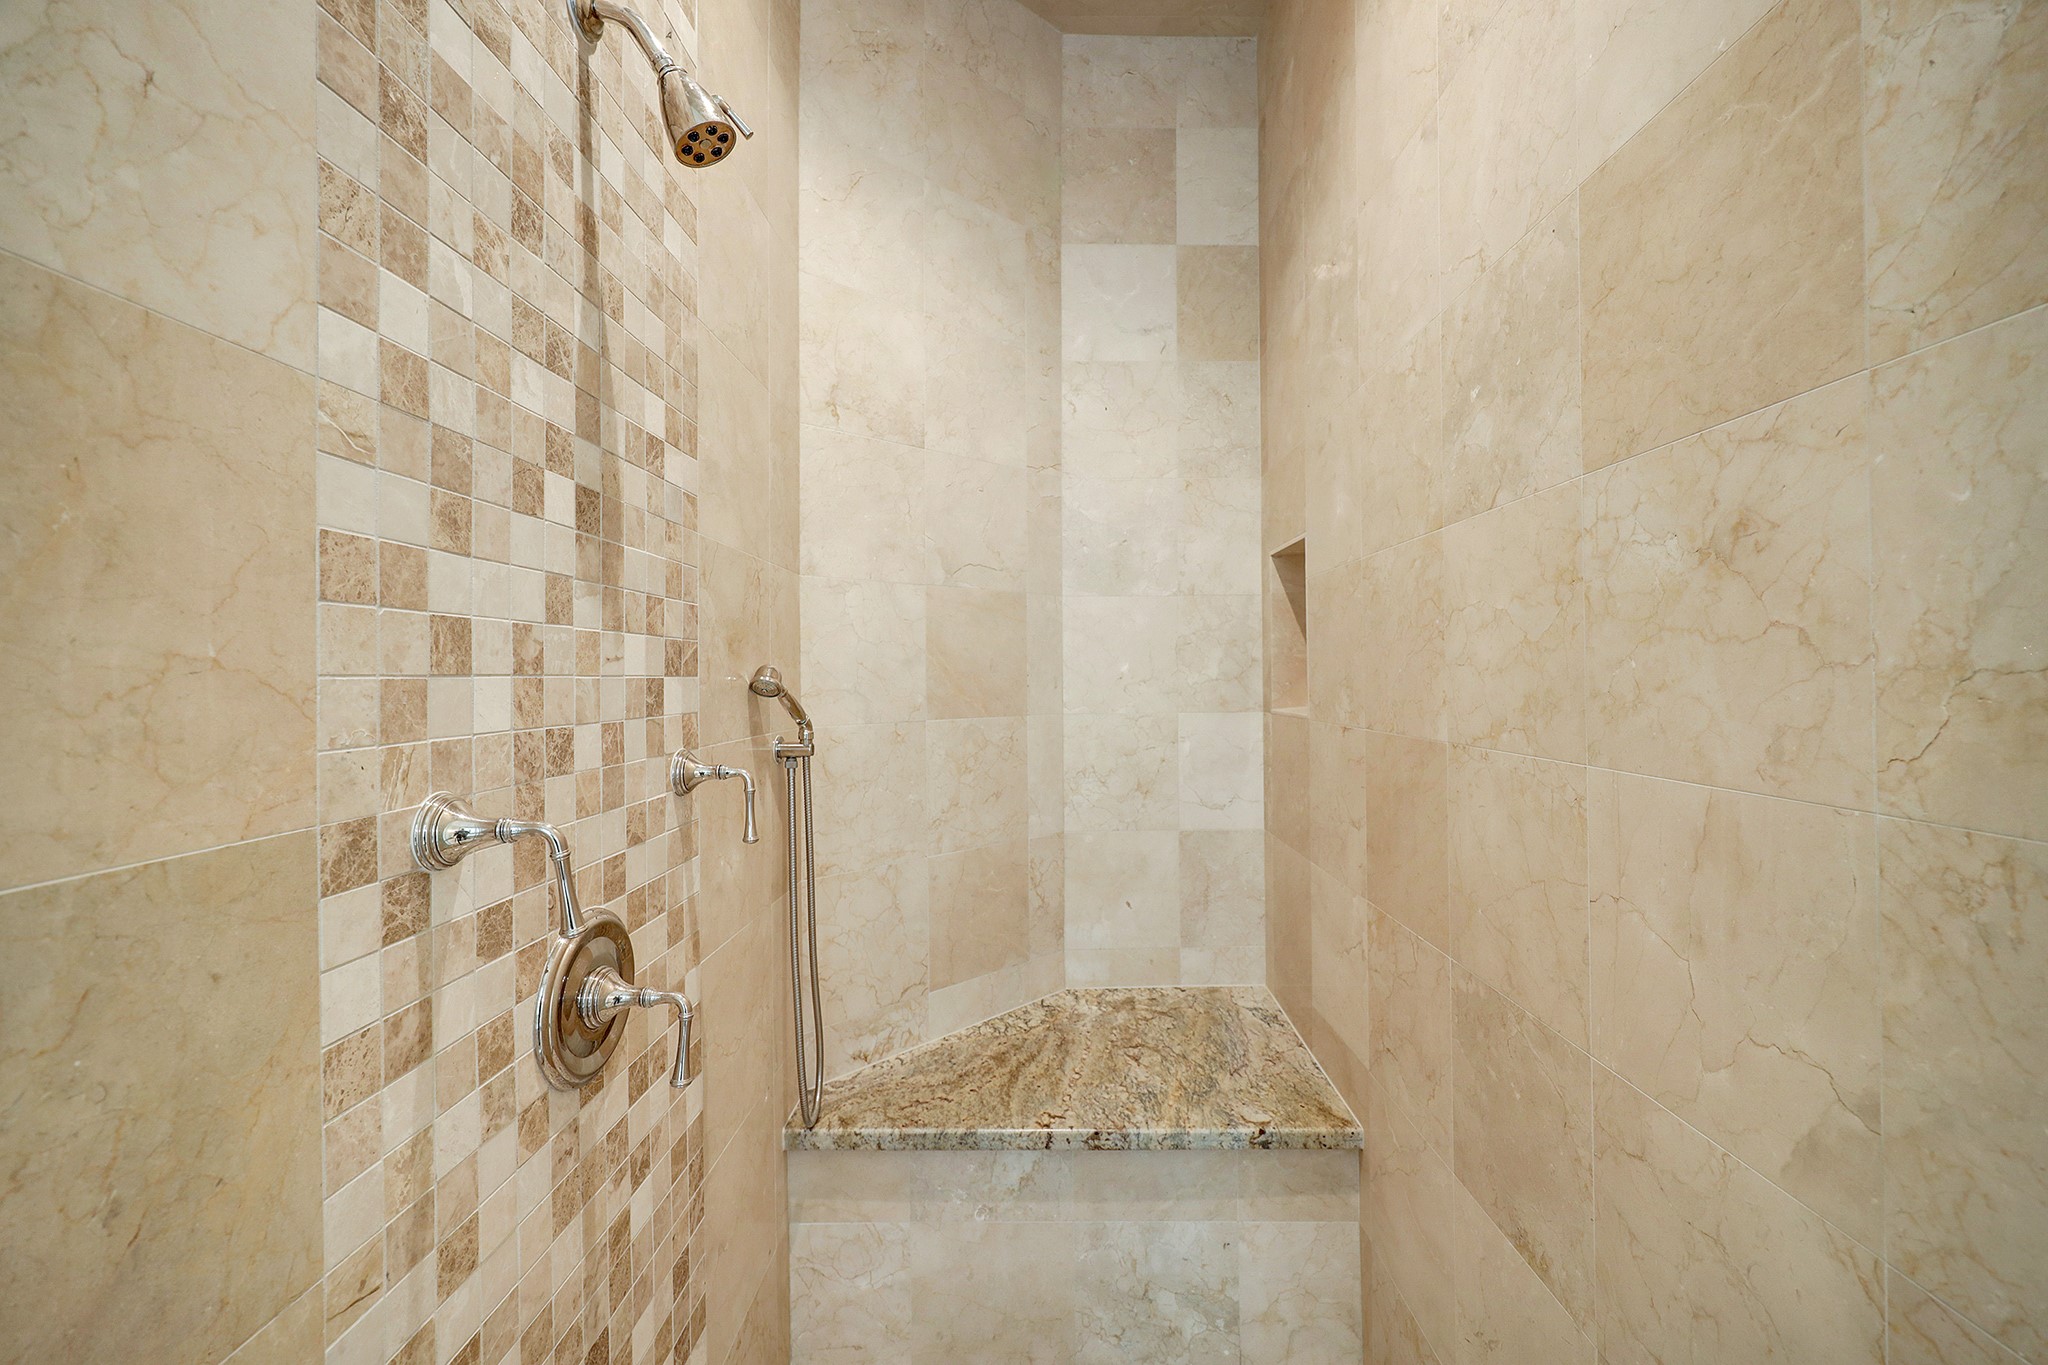 LARGE SHOWER WITH EXTRA ARM SPRAYER AND SEAT MADE OF MARBLE AND TRAVERTINE.  BEAUTIFUL NEUTRAL TONES.